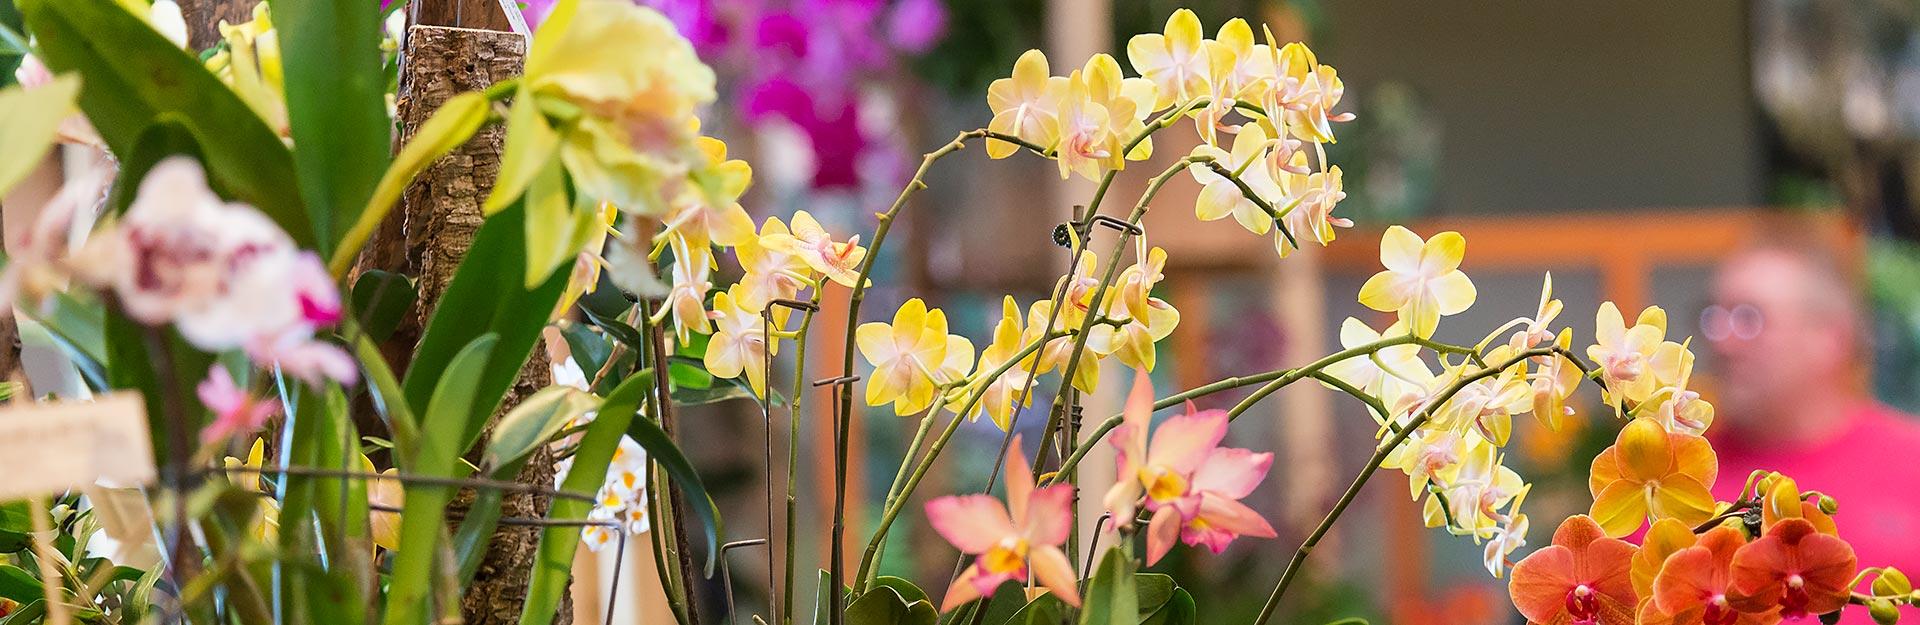 Illinois Orchid Society Spring Show & Sale at the Chicago Botanic Garden